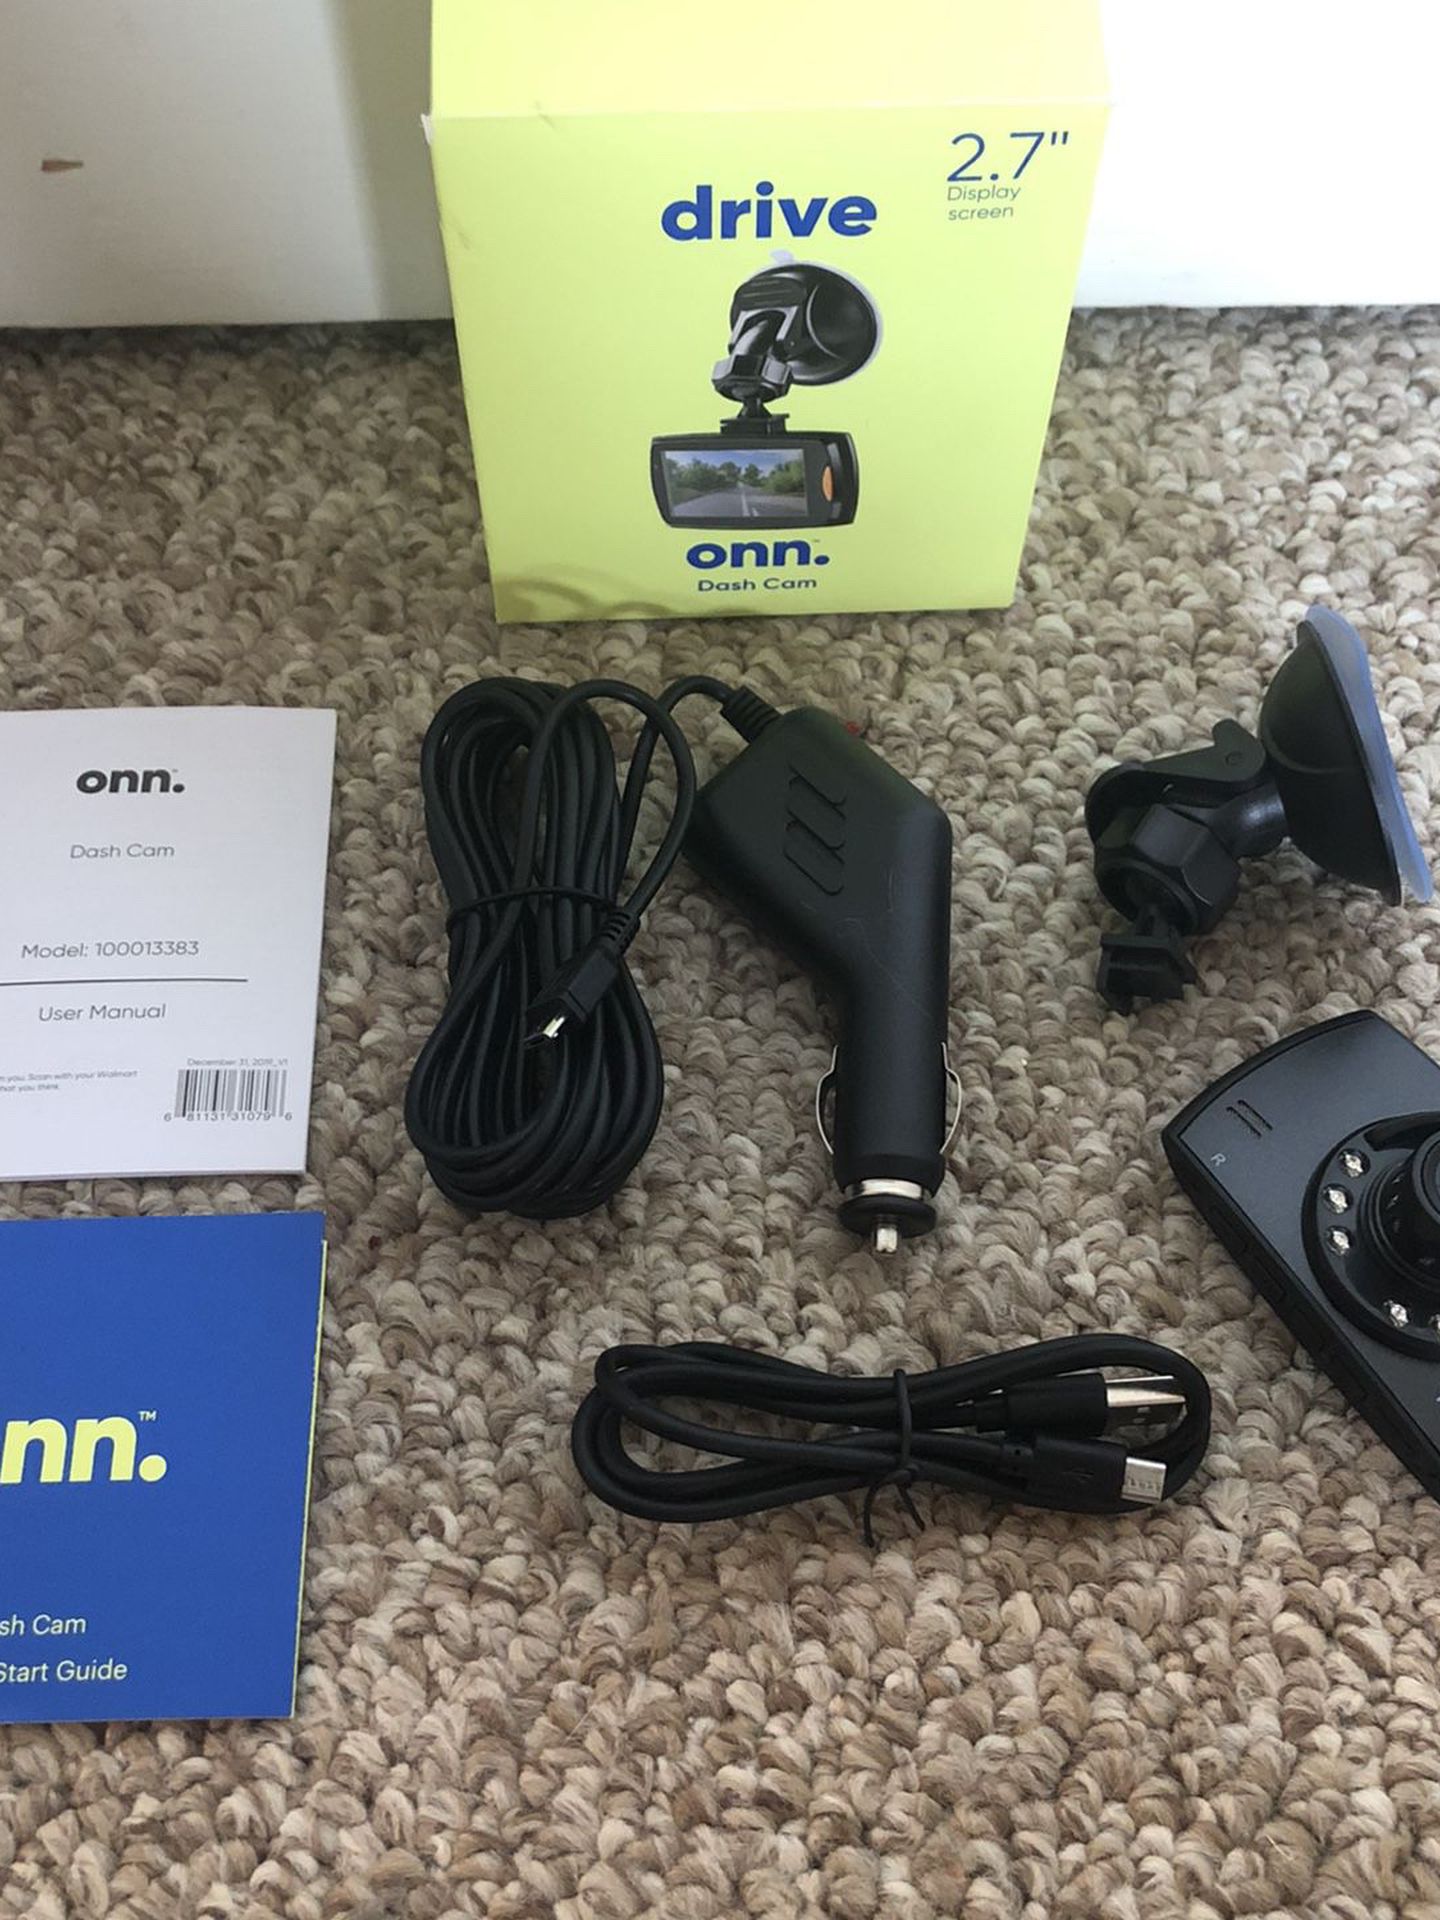 onn. Dash Cam with 2.7" Display Screen